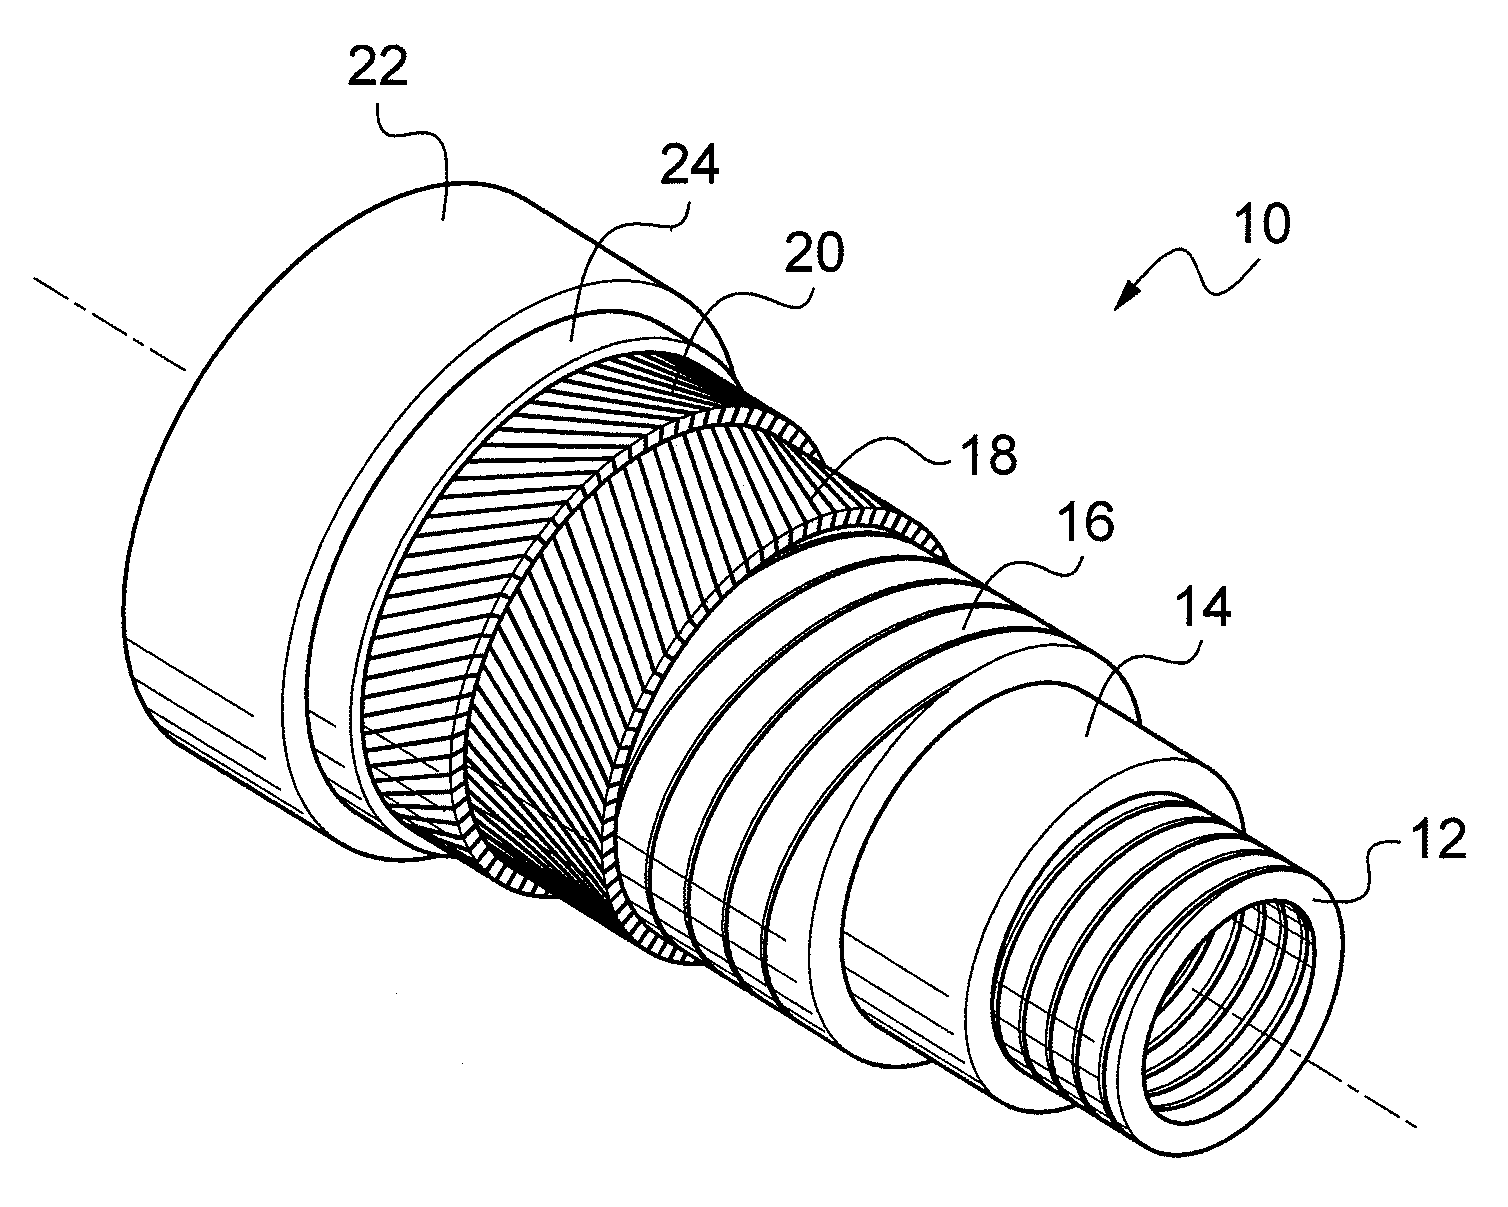 Flexible tubular underwater pipe for great depths, and method for manufacturing same